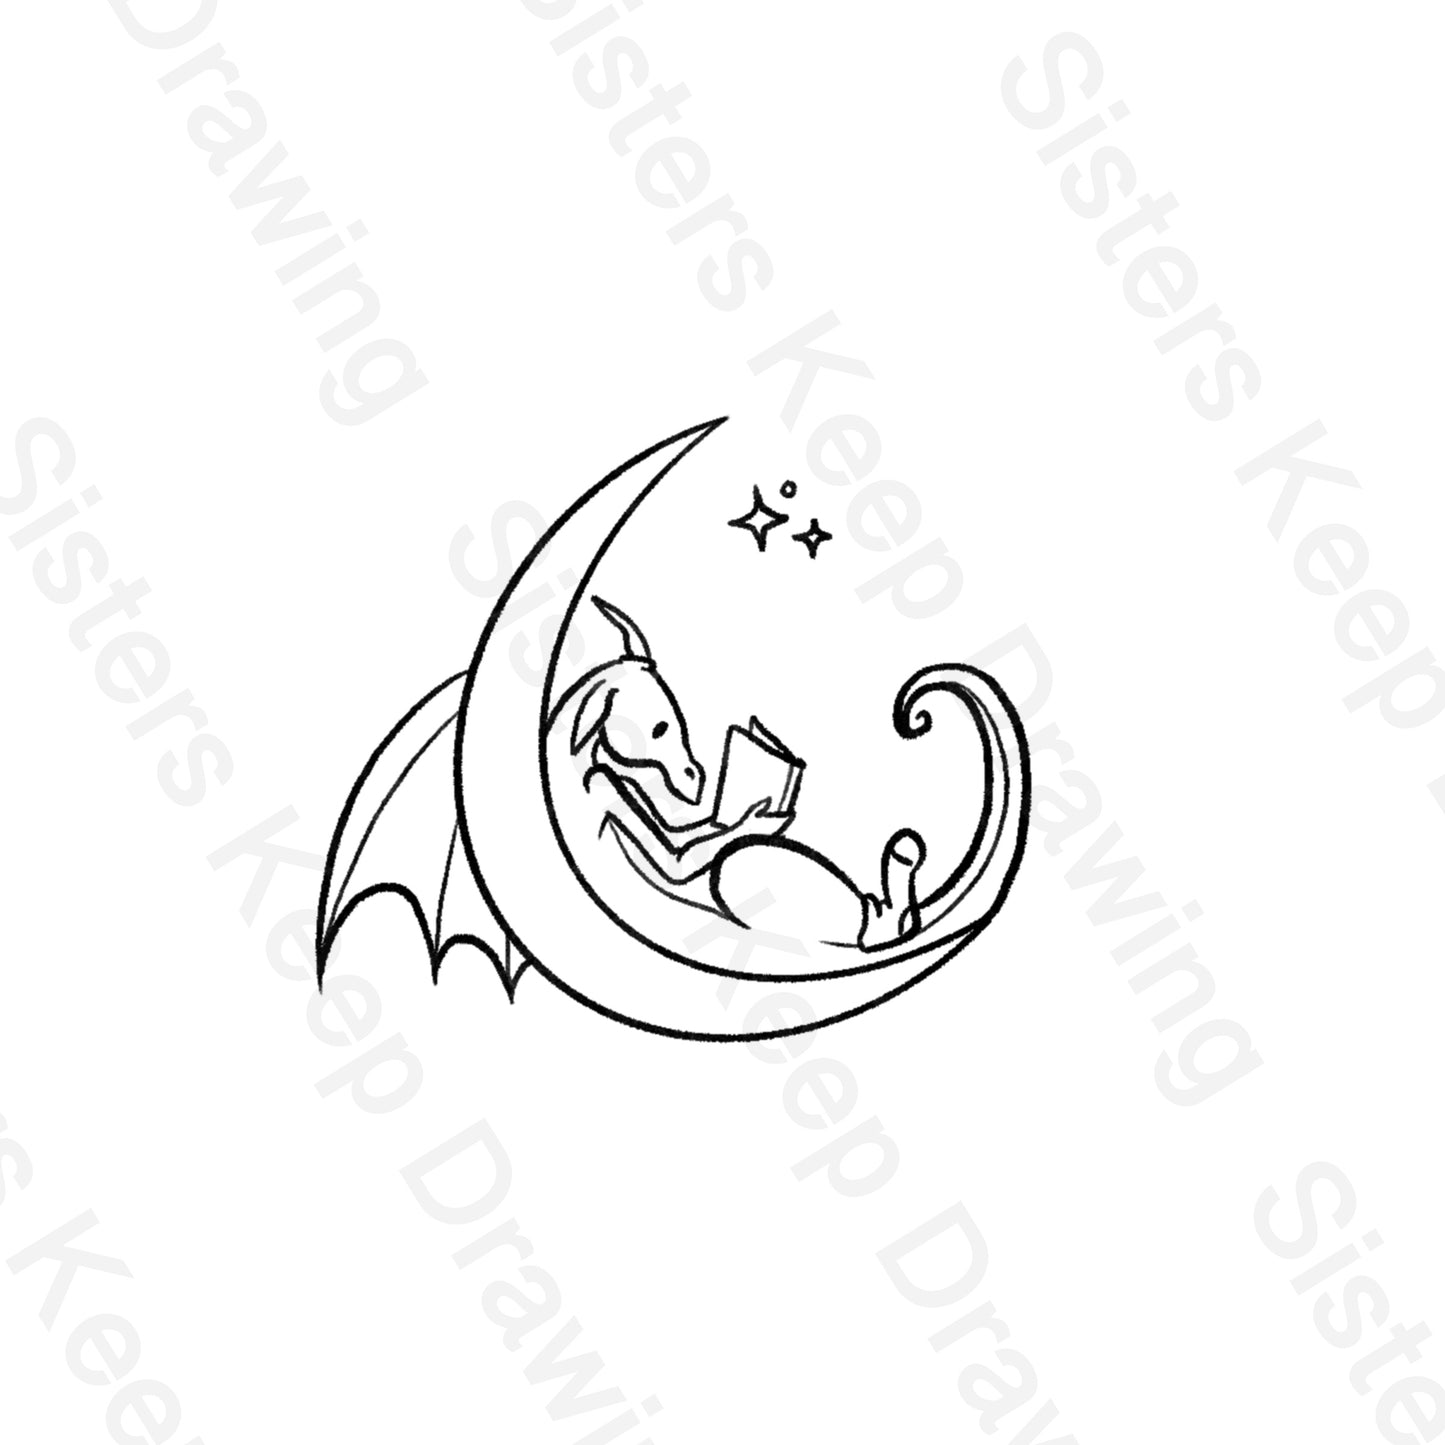 Tiny Dragon reading on the moon -Tattoo Transparent Permission PNG- instant download digital printable art